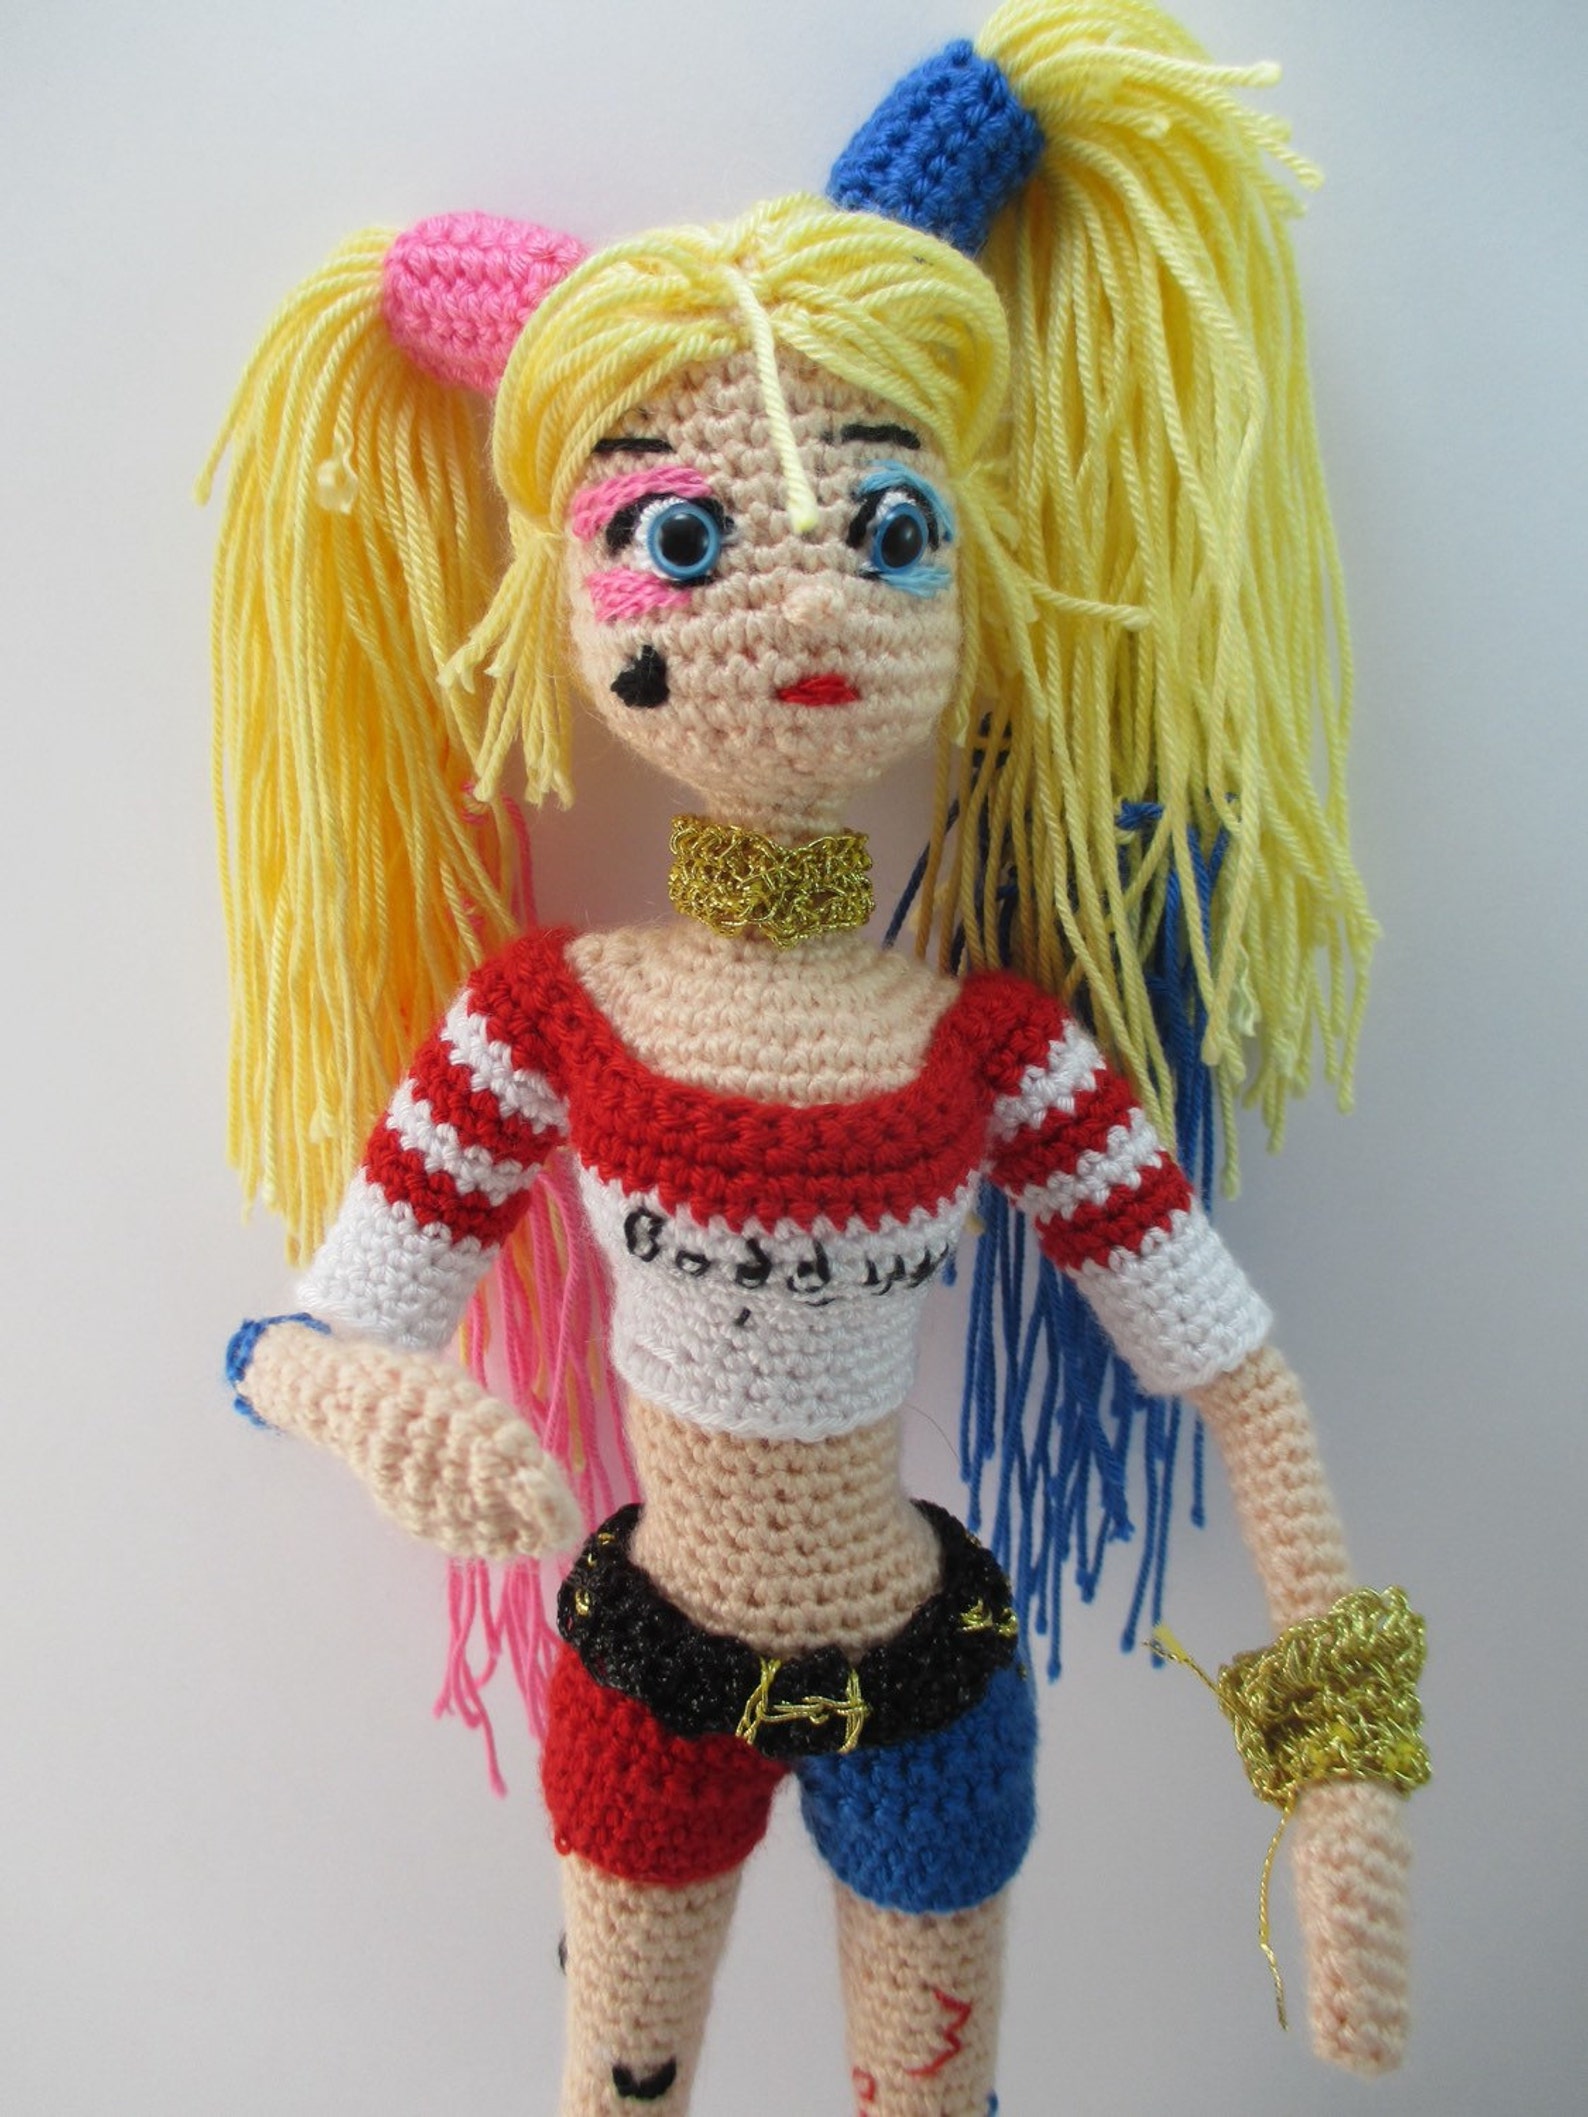 Harley Quinn Suicide Squad Inspired Crocheted Doll Harley Etsy